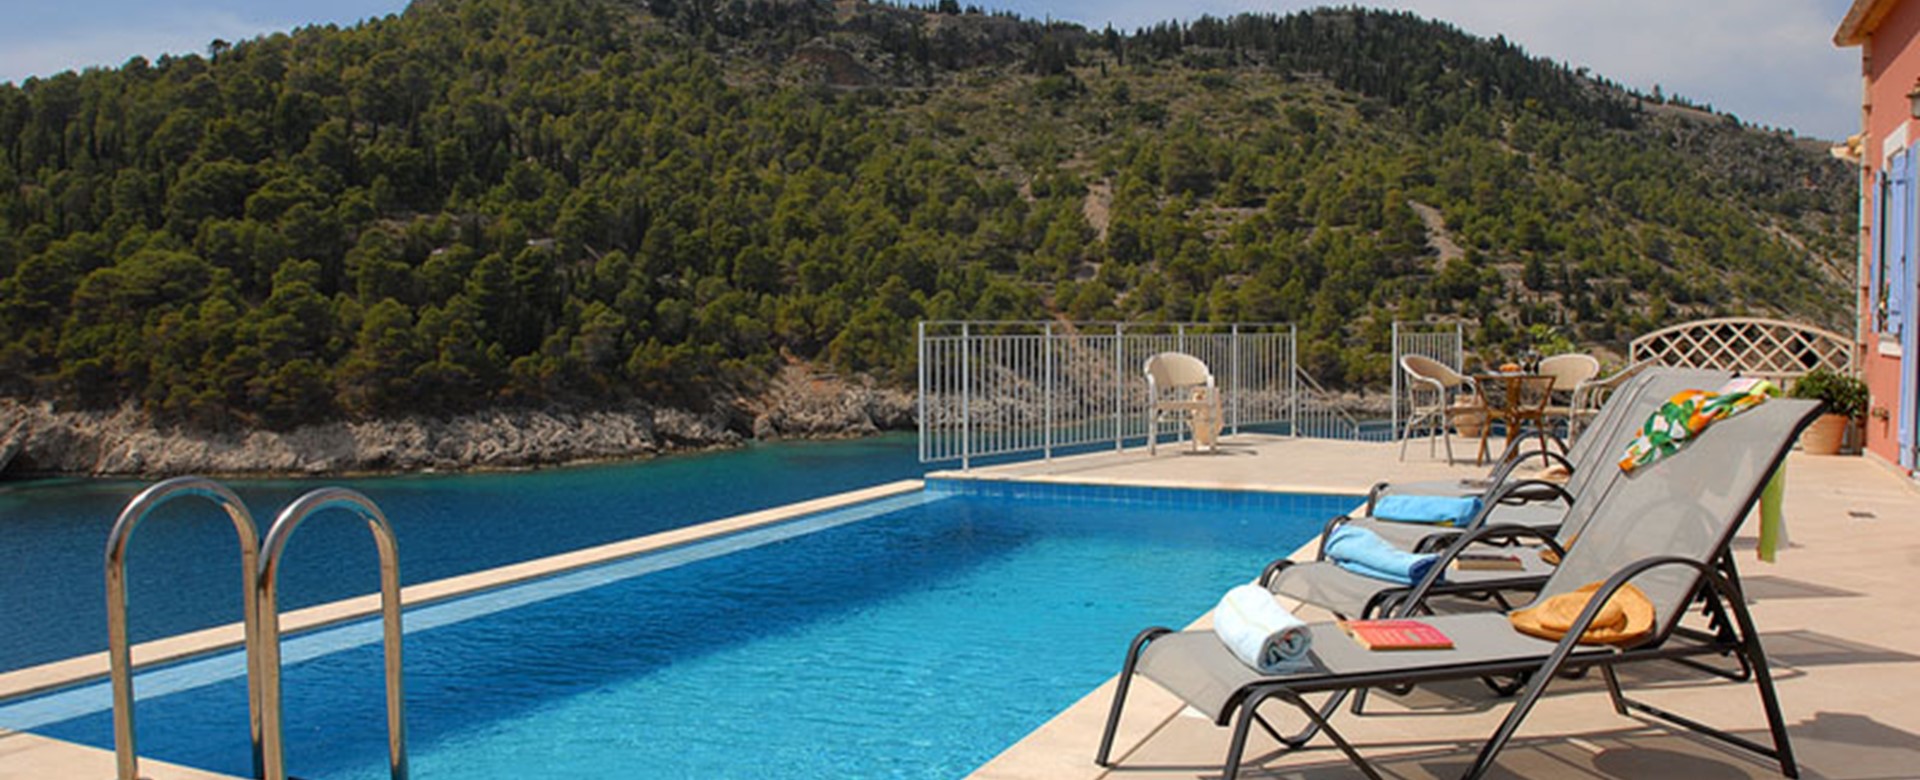 Infinity pool, sun loungers and view of the hill outside Villa Panorama, Assos, Kefalonia